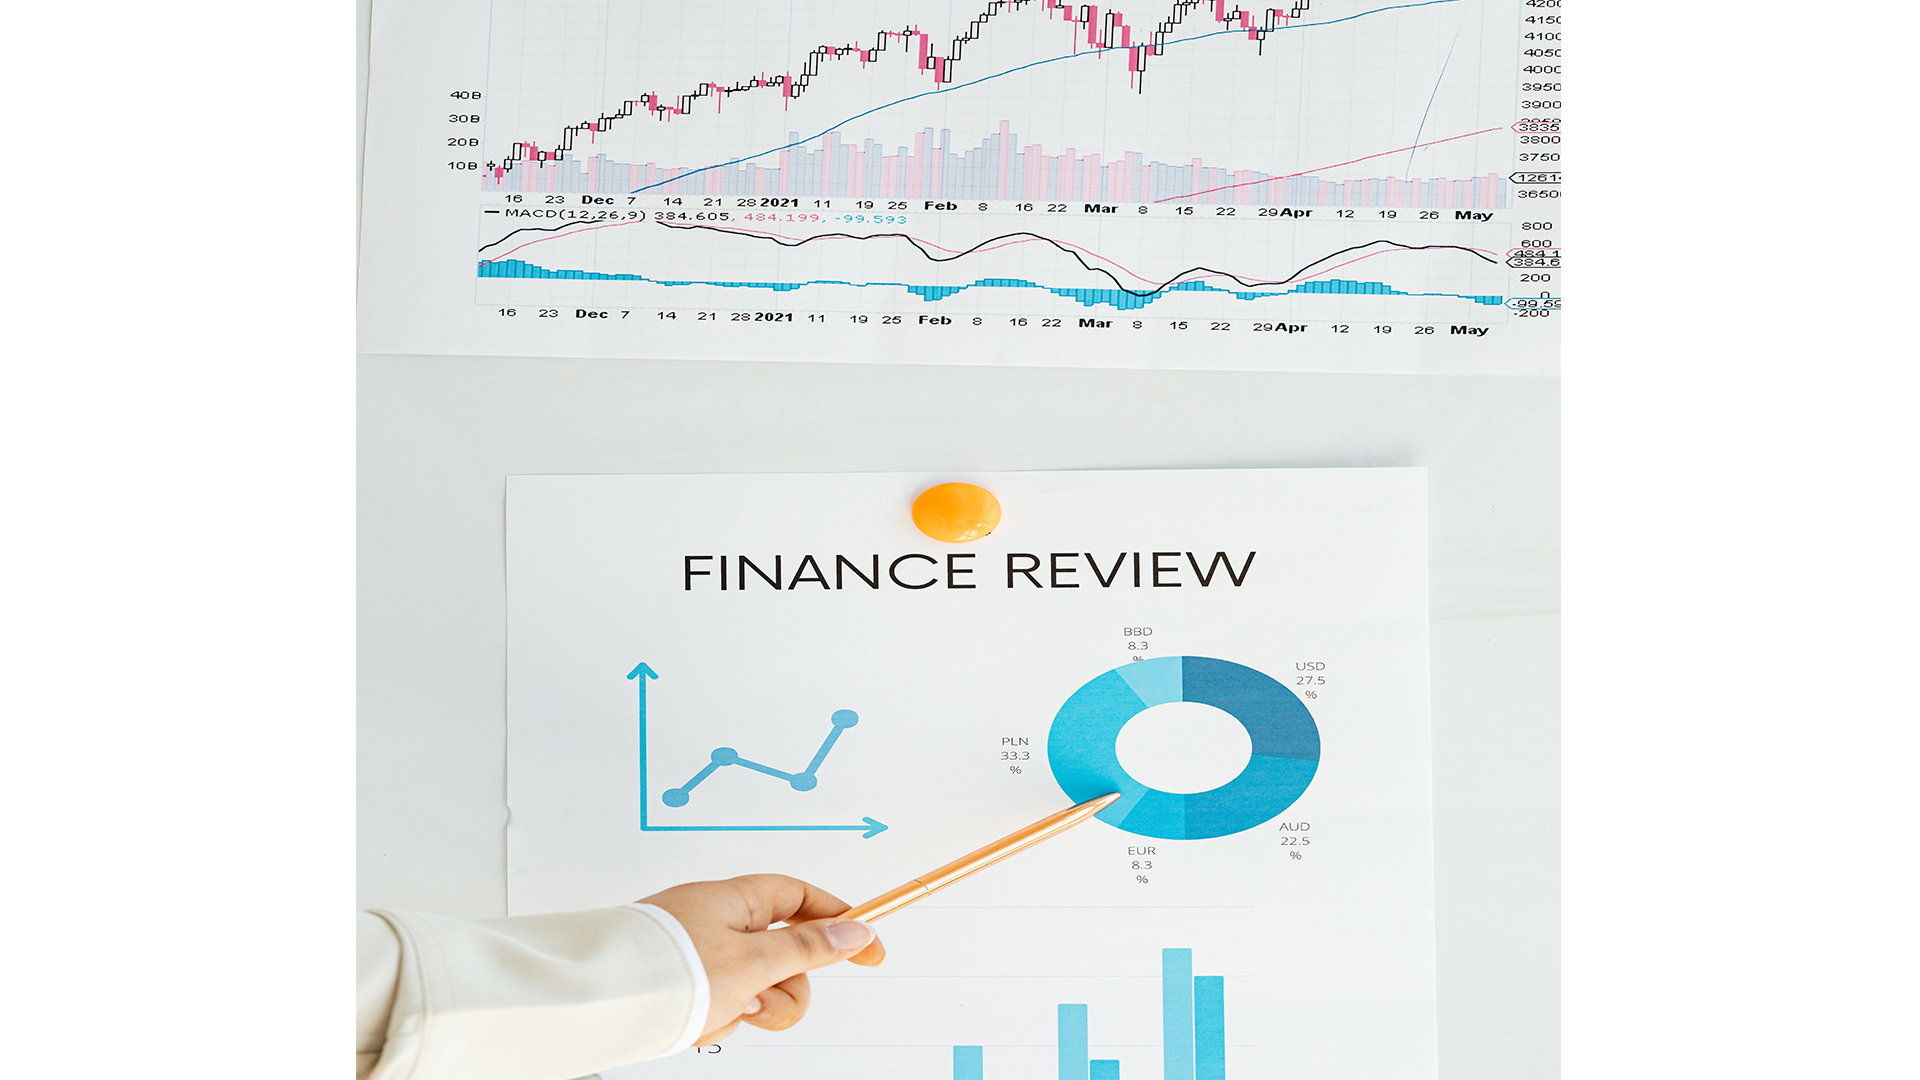 Uncover Financial Insights With Statement Analysis